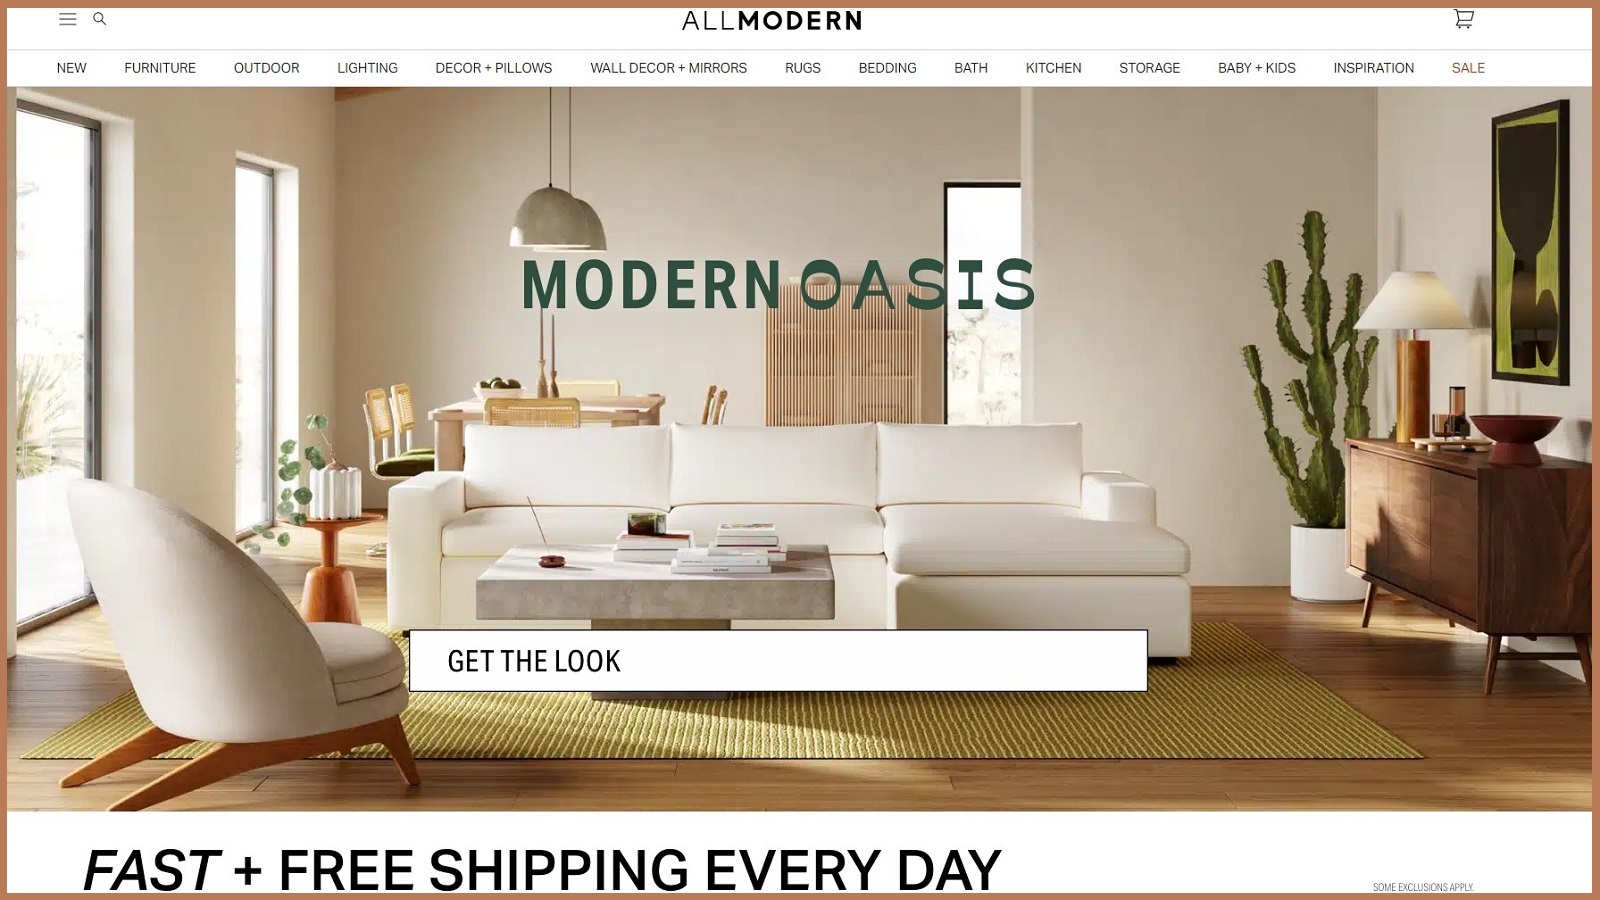 AllModern Furniture Review: Does It Worth to Buy?